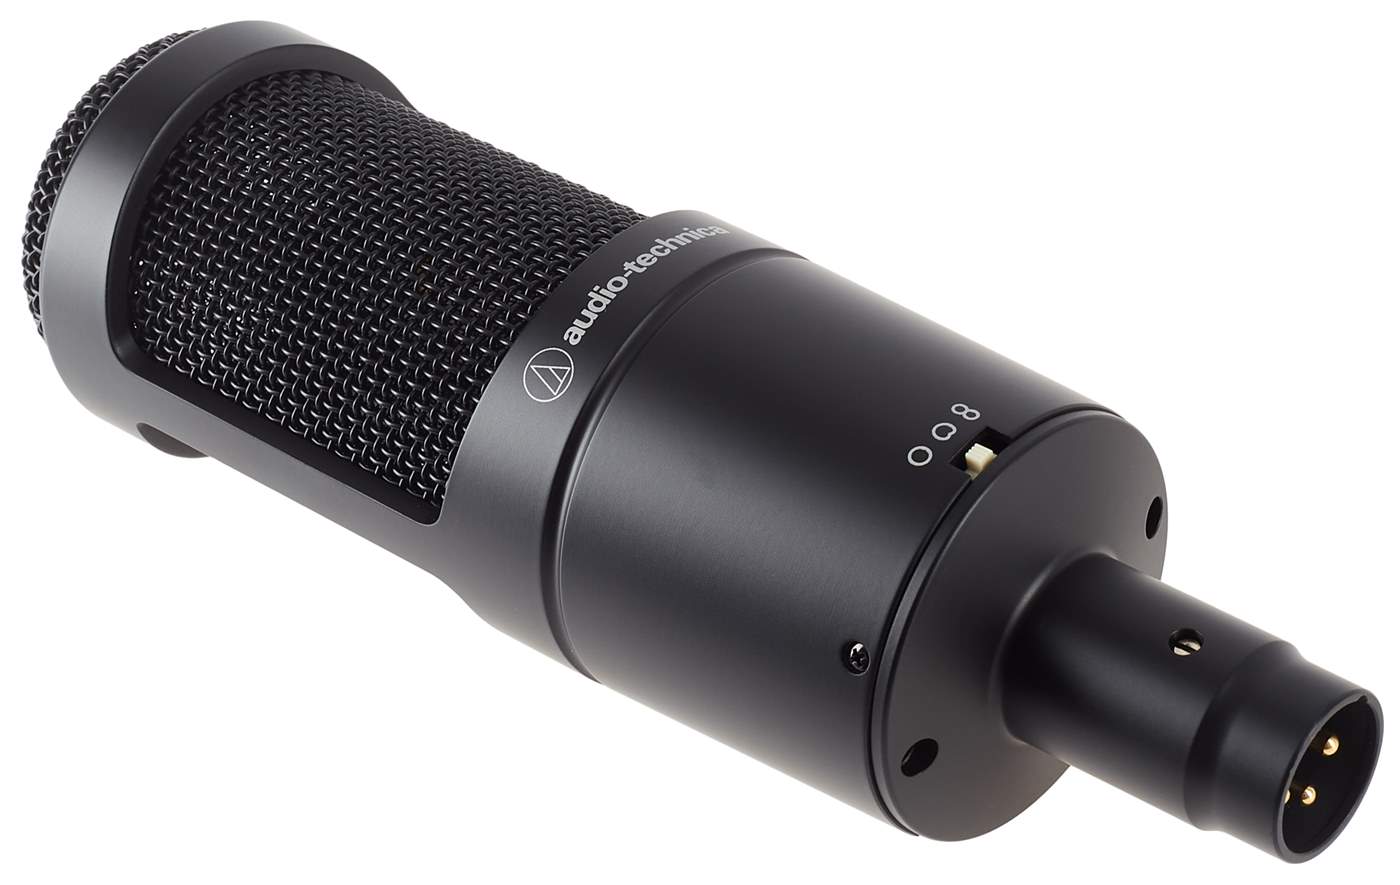 AUDIO-TECHNICA AT2050 Condenser Microphone | Kytary.ie